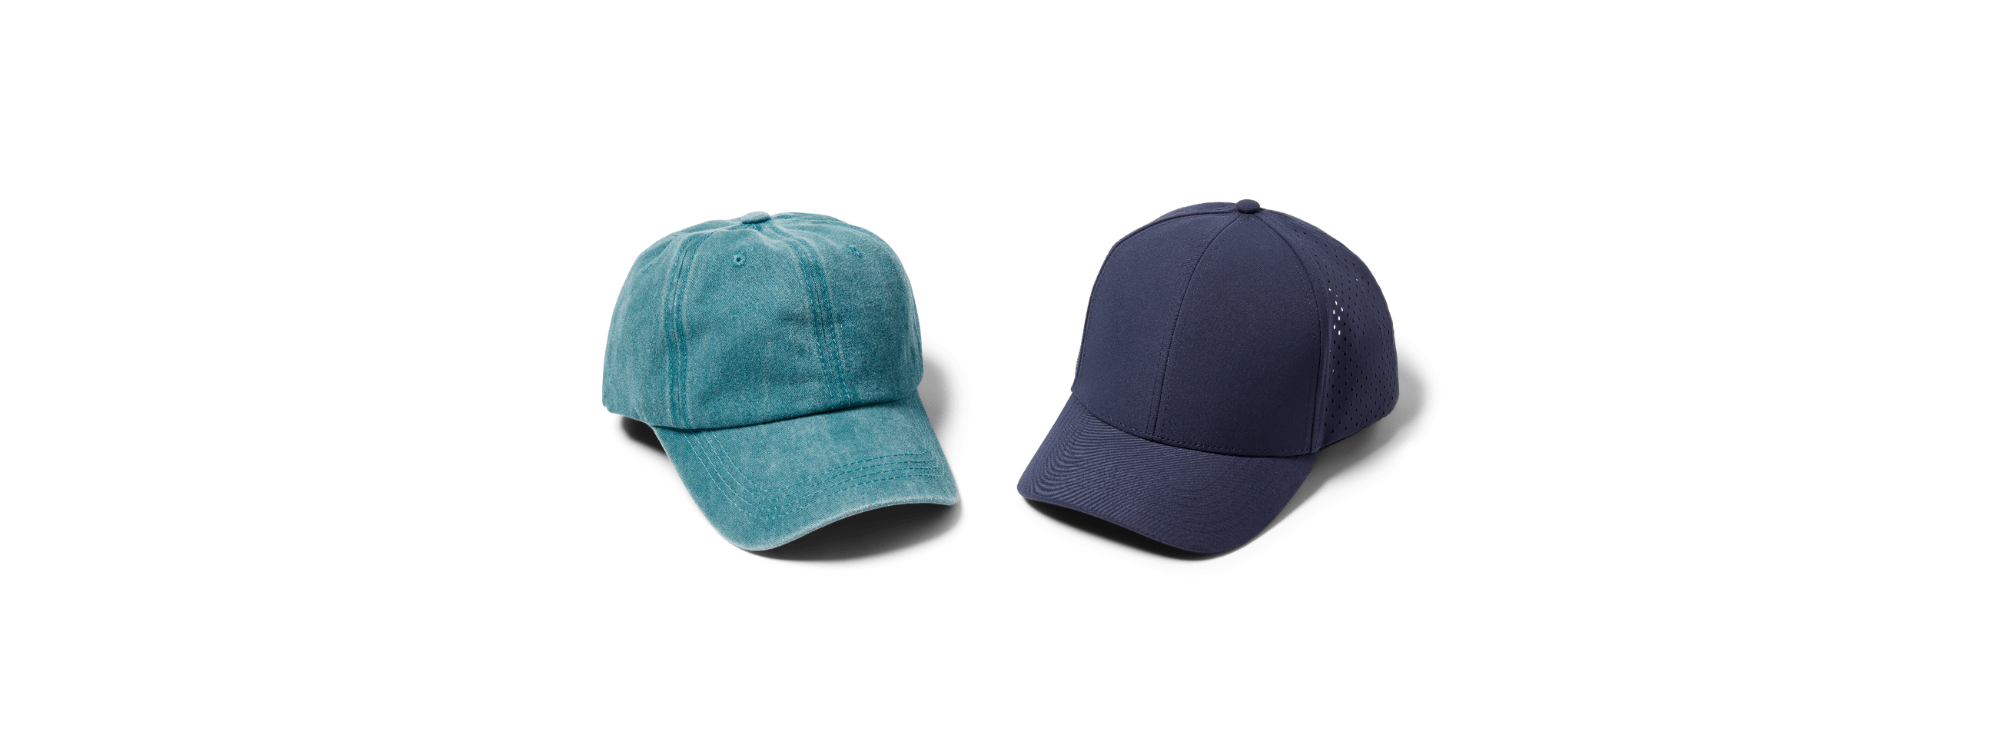 Why Are Unbranded Hats Becoming a Thing? - Lift Down